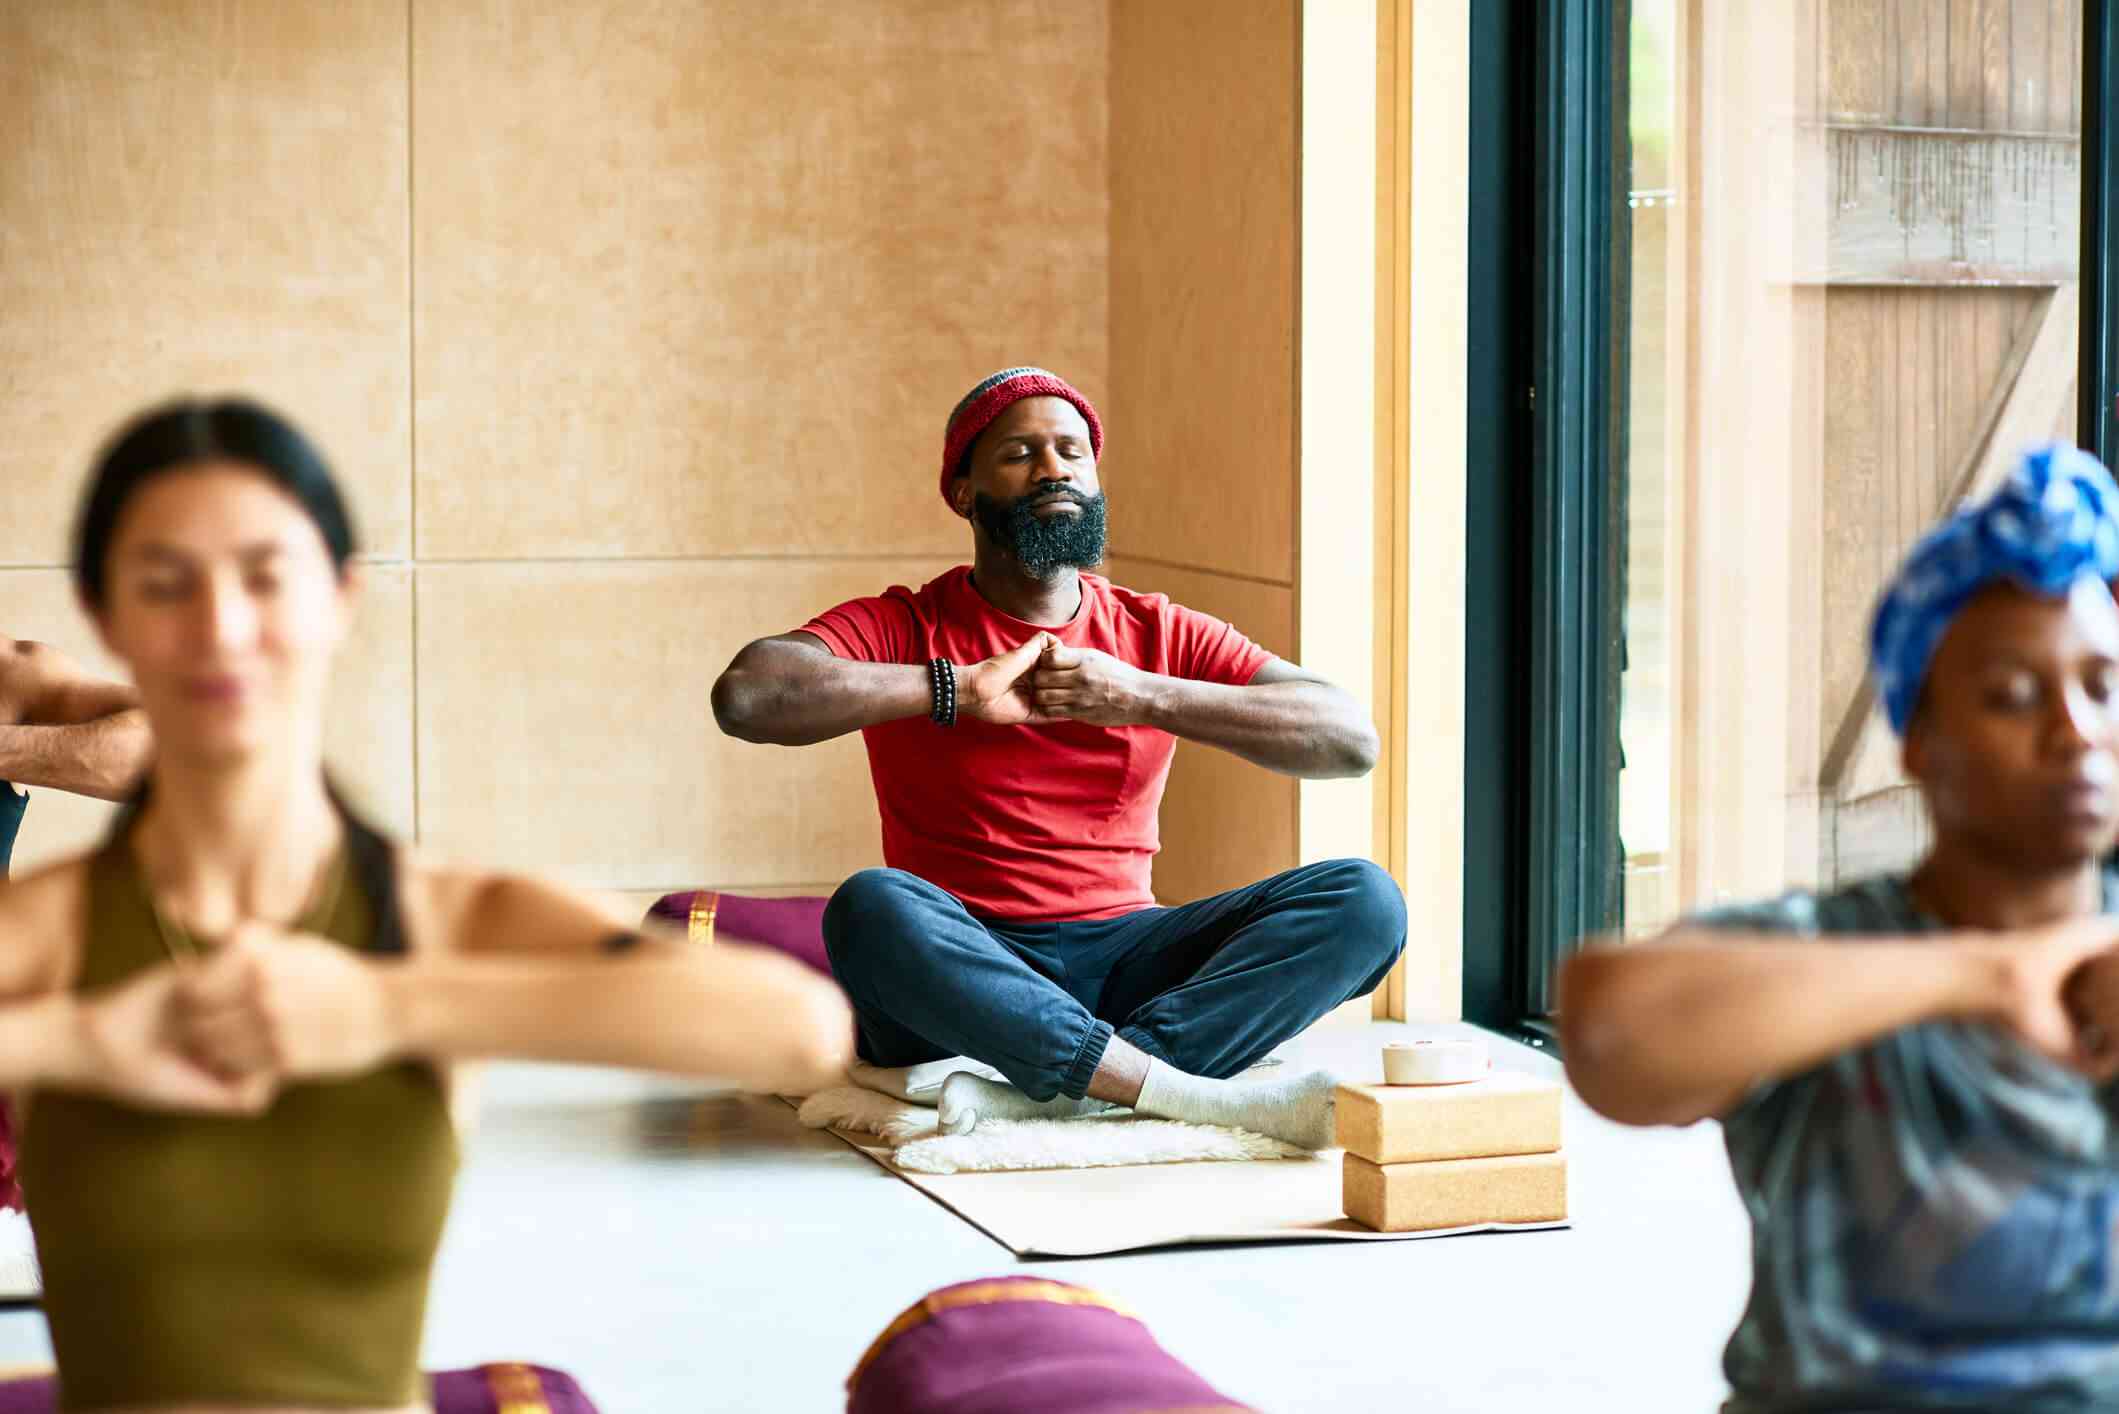 A man in a red shirt sits in a yoga class and practices some stretches to help reduce his anxiety.